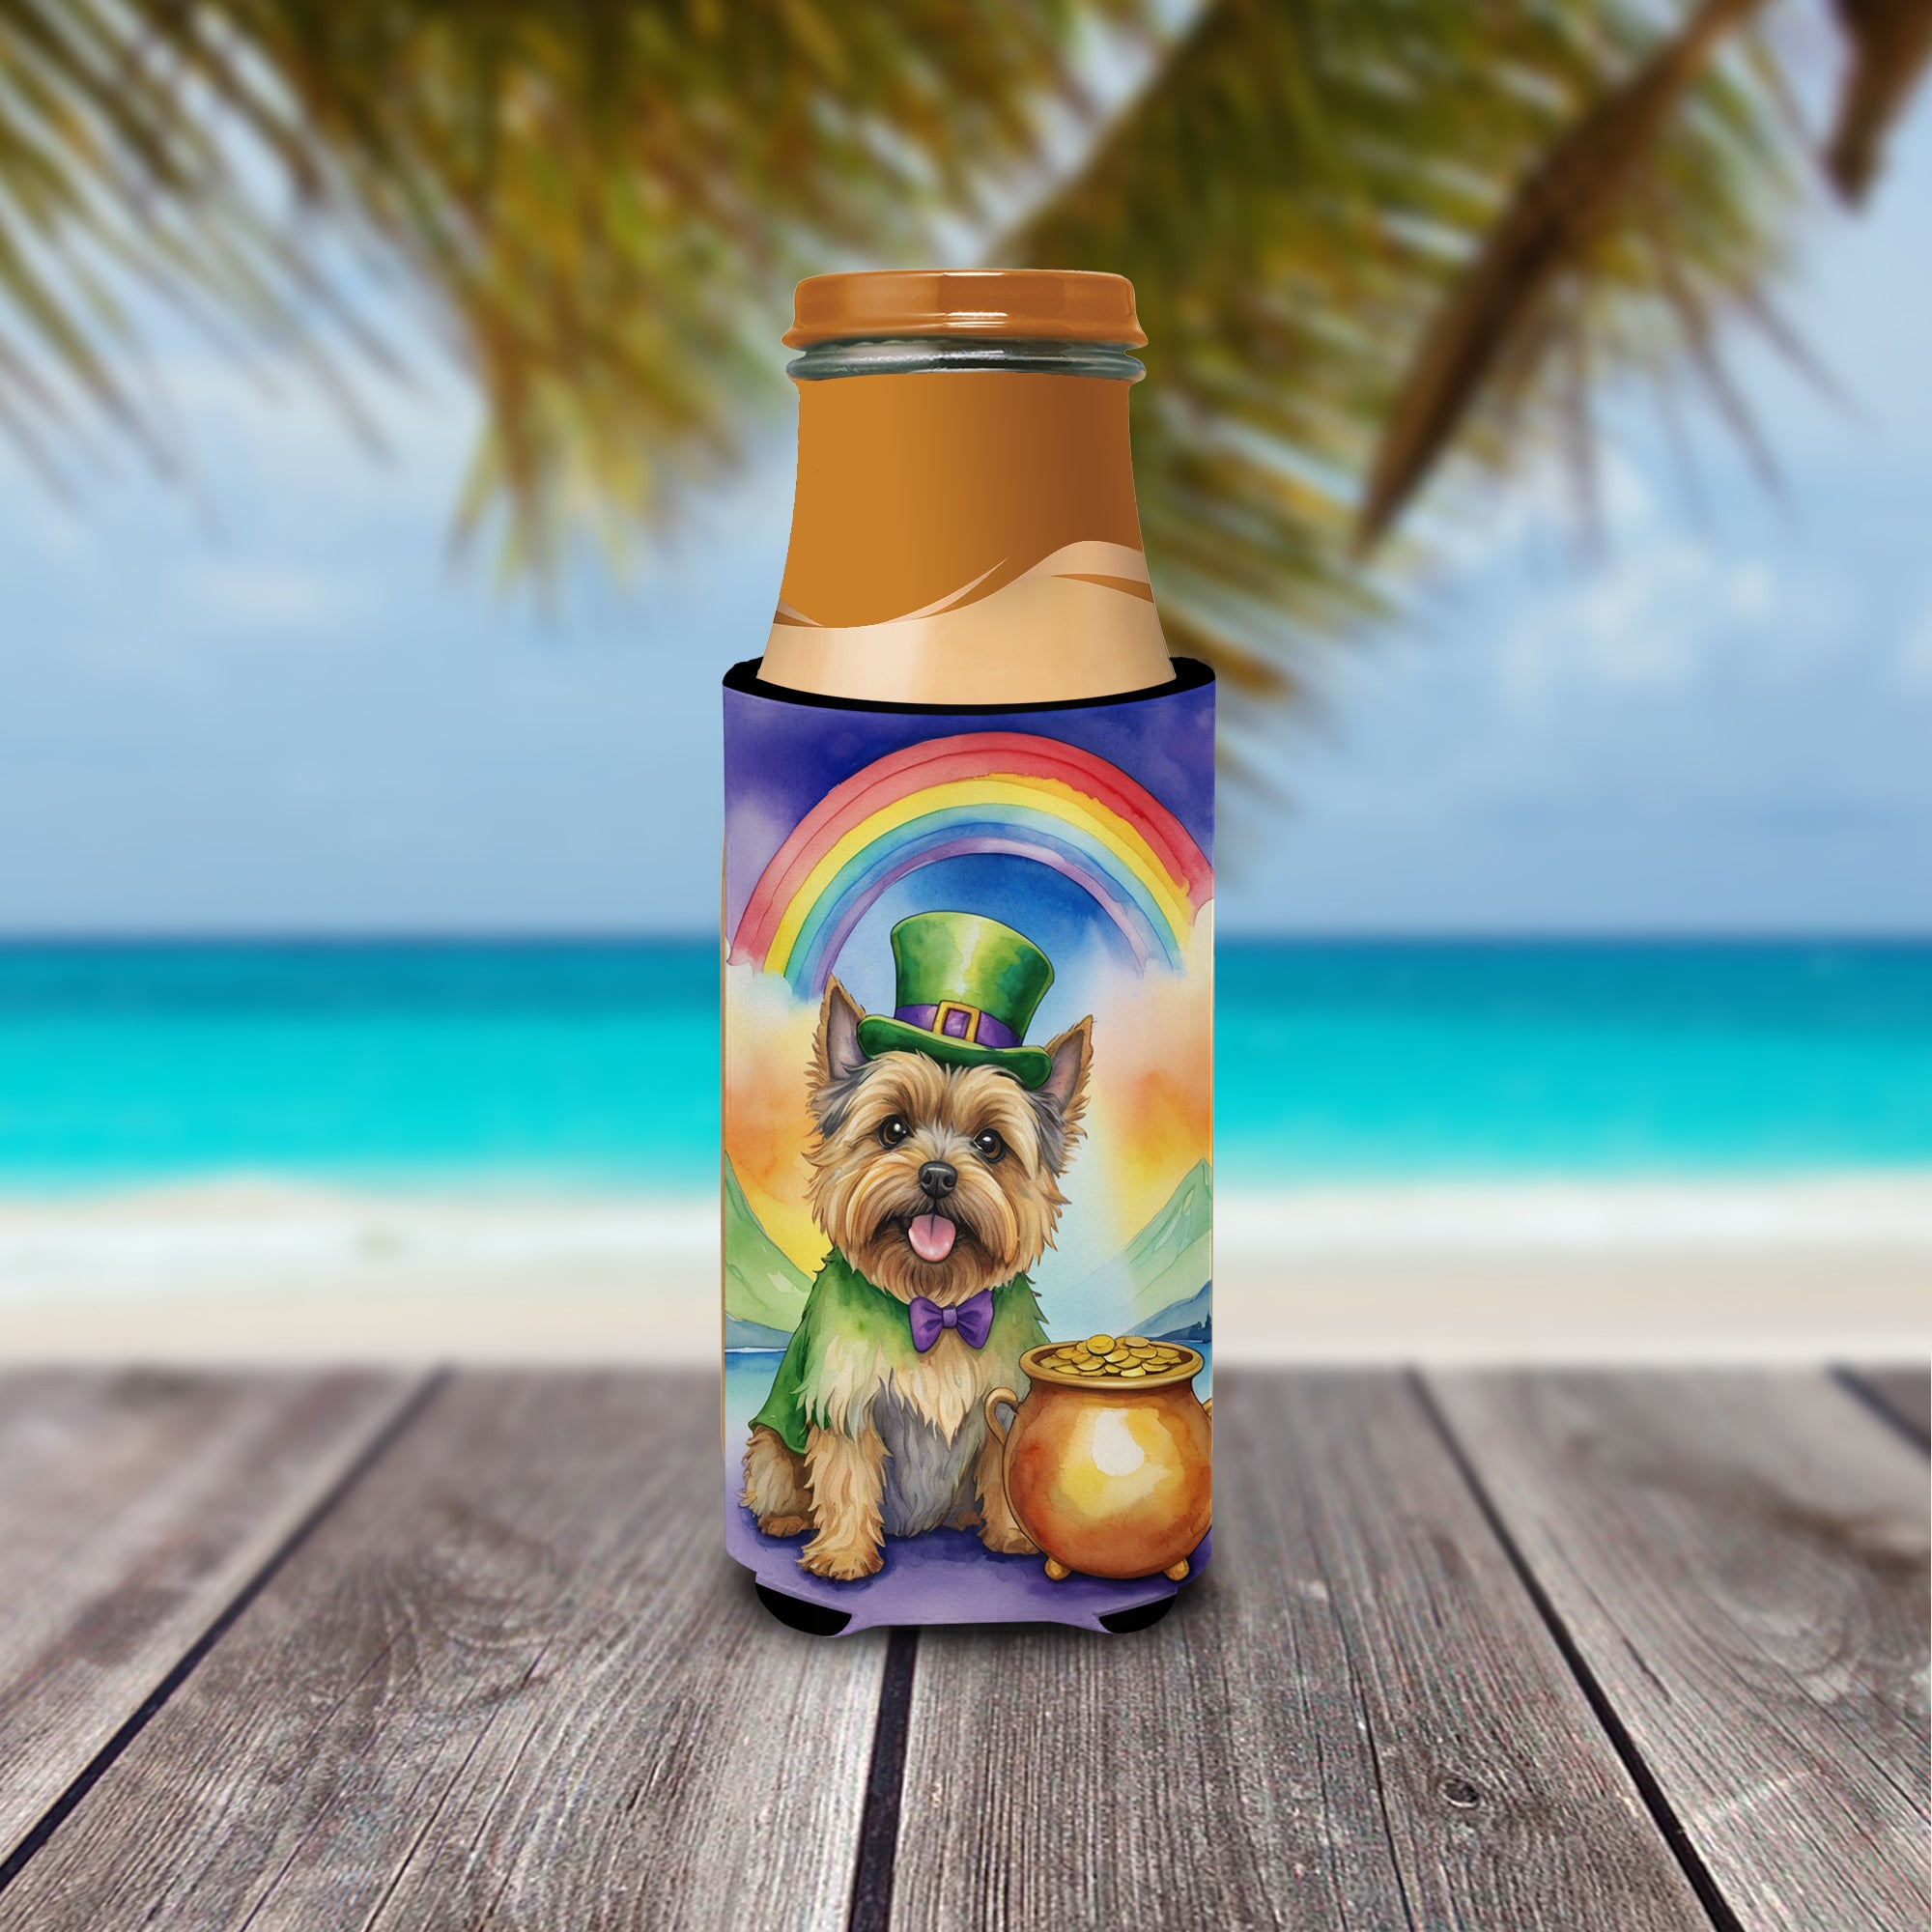 Cairn Terrier St Patrick's Day Hugger for Ultra Slim Cans